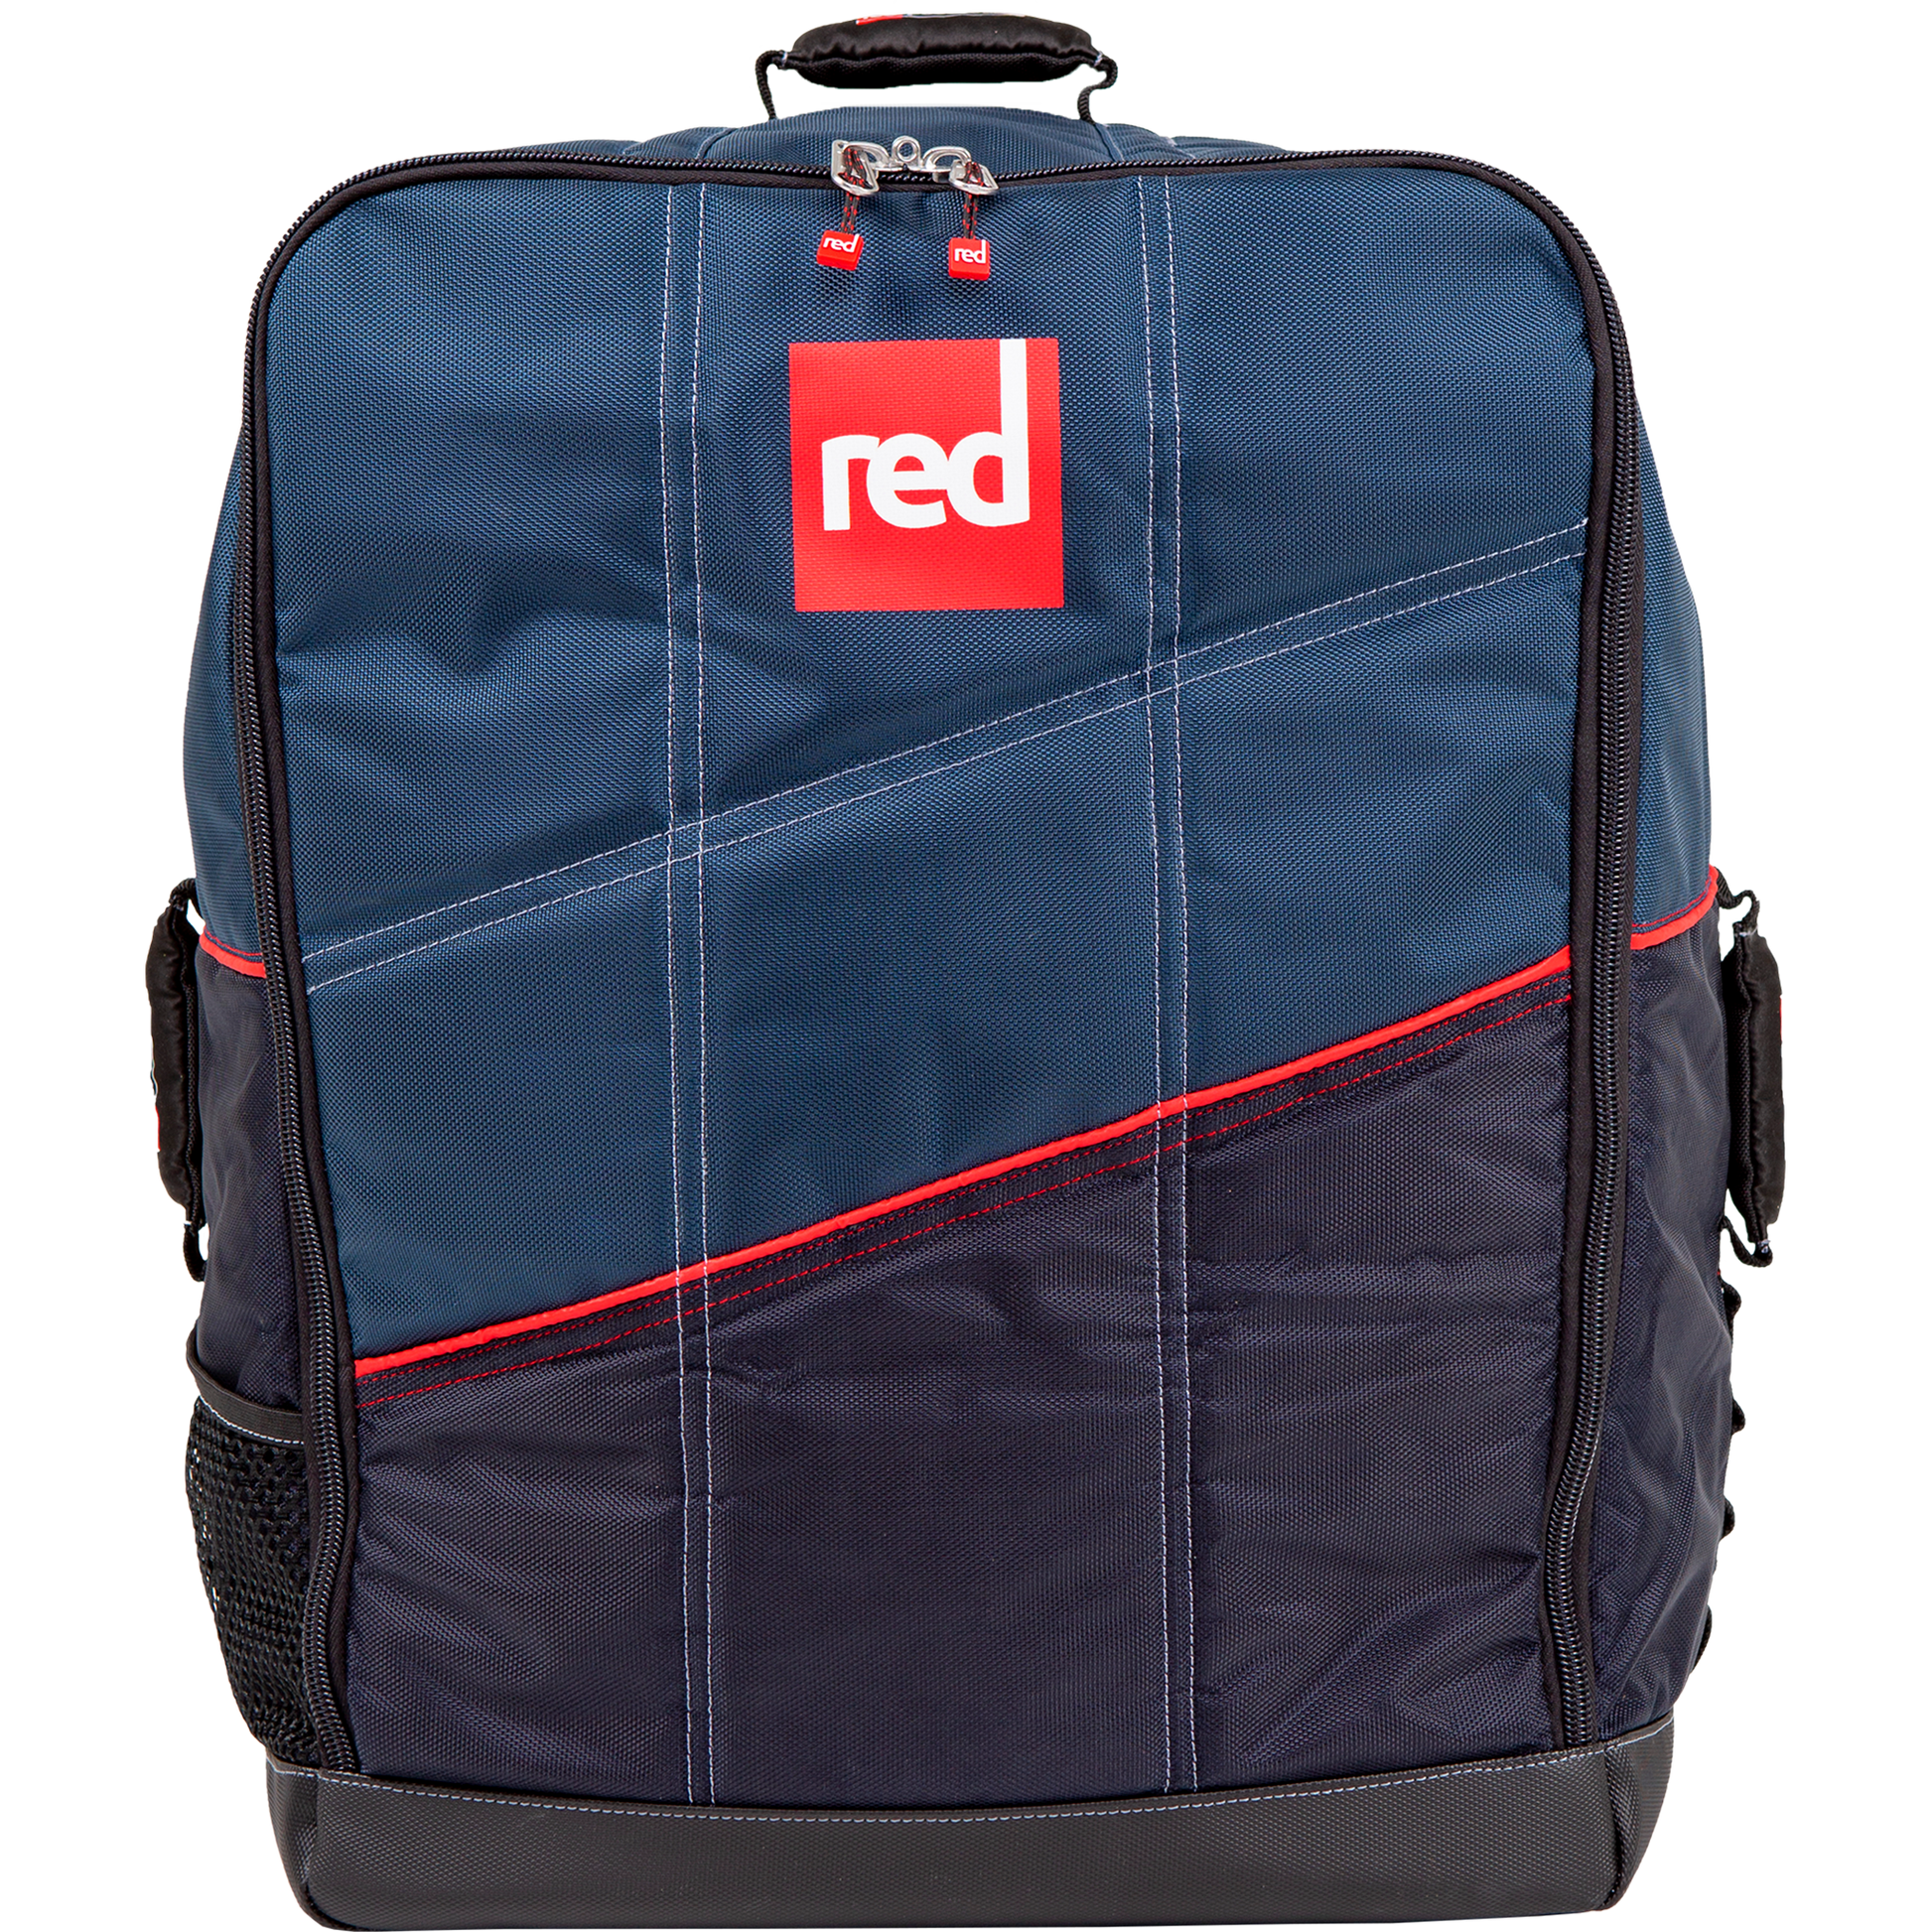 2022 Red Paddle Co 11'0" Compact Inflatable SUP Back pack